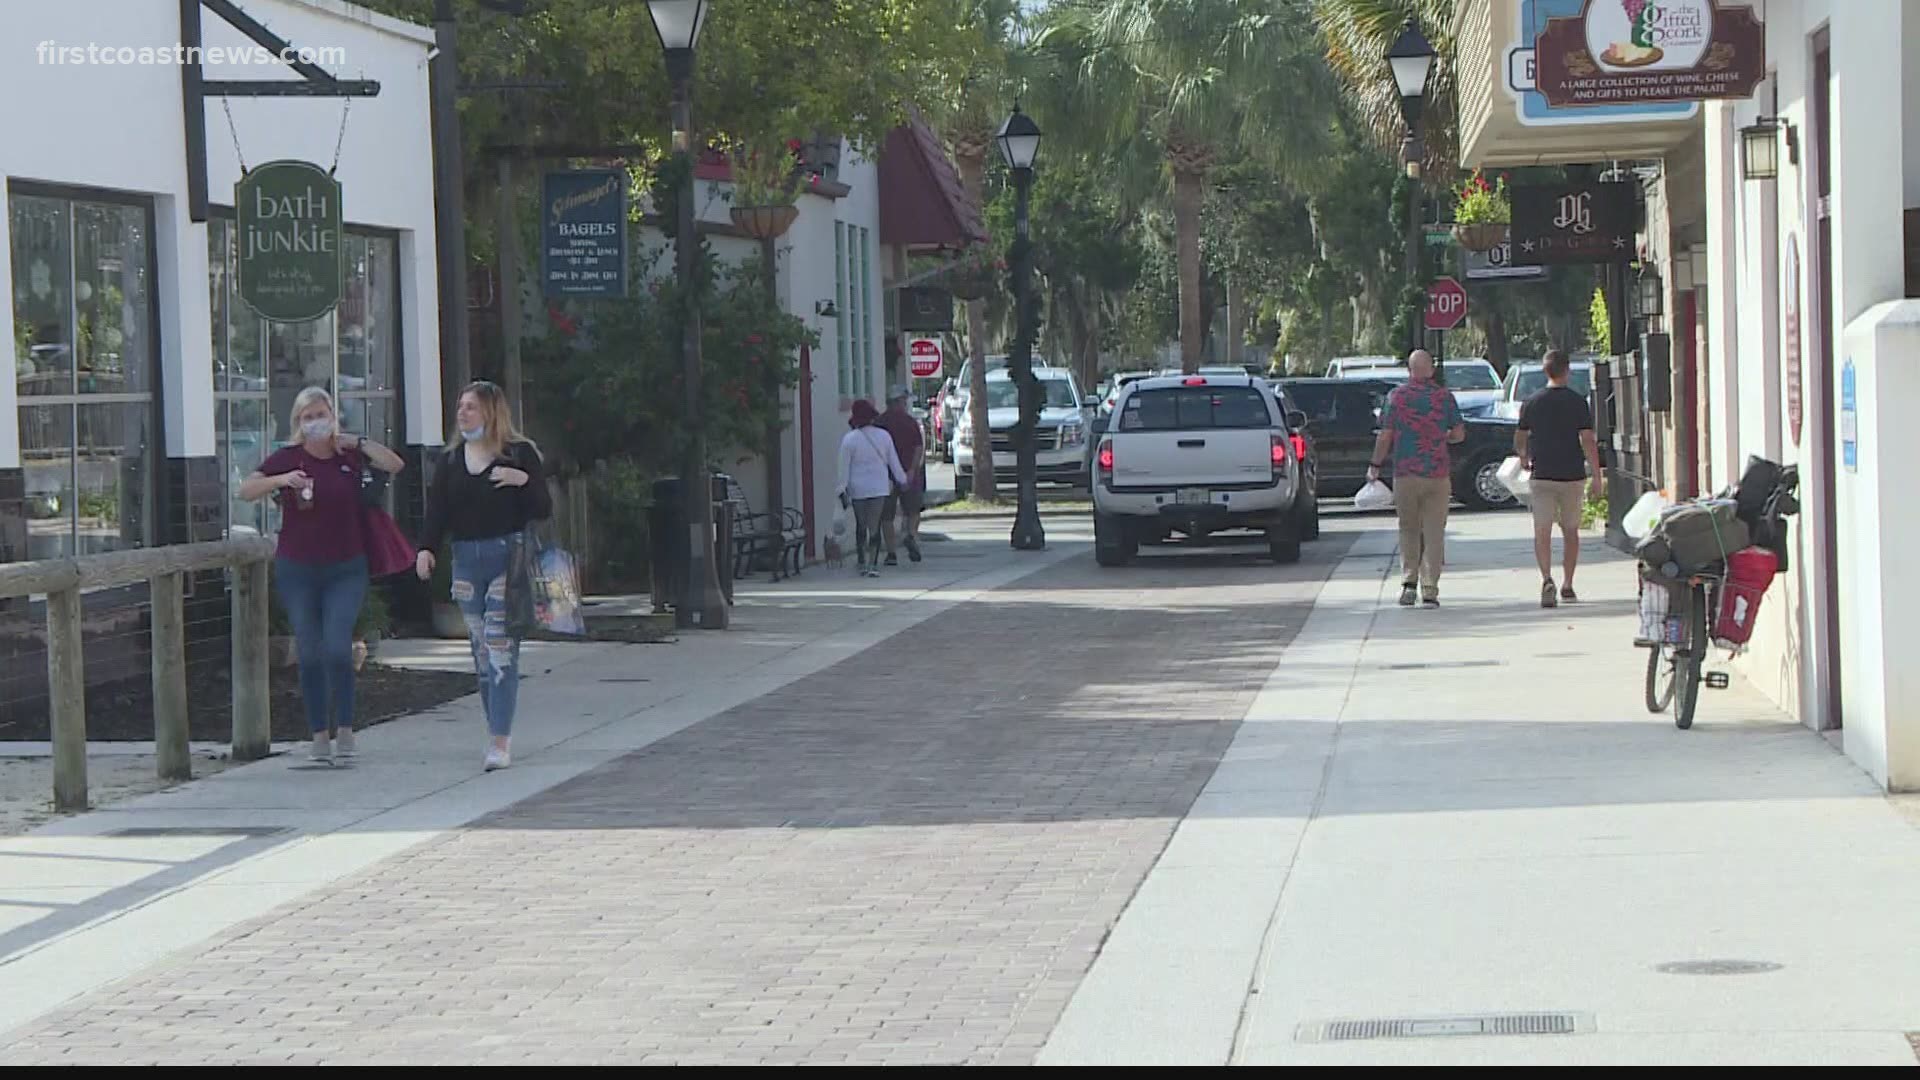 With the holiday shopping season getting started, some businesses in St. Augustine are struggling to find help.